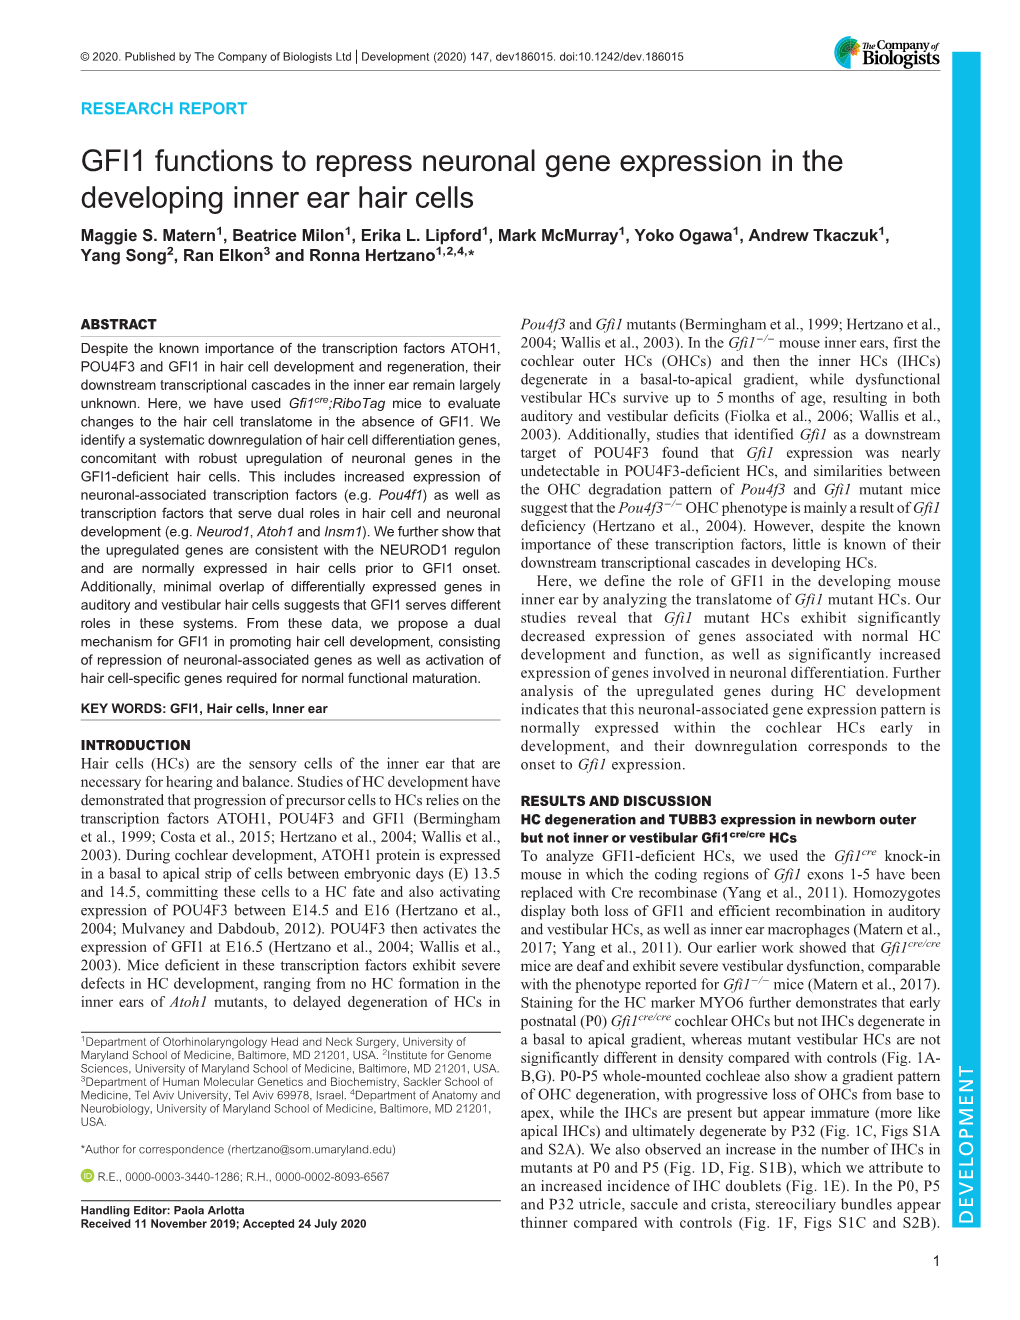 GFI1 Functions to Repress Neuronal Gene Expression in the Developing Inner Ear Hair Cells Maggie S